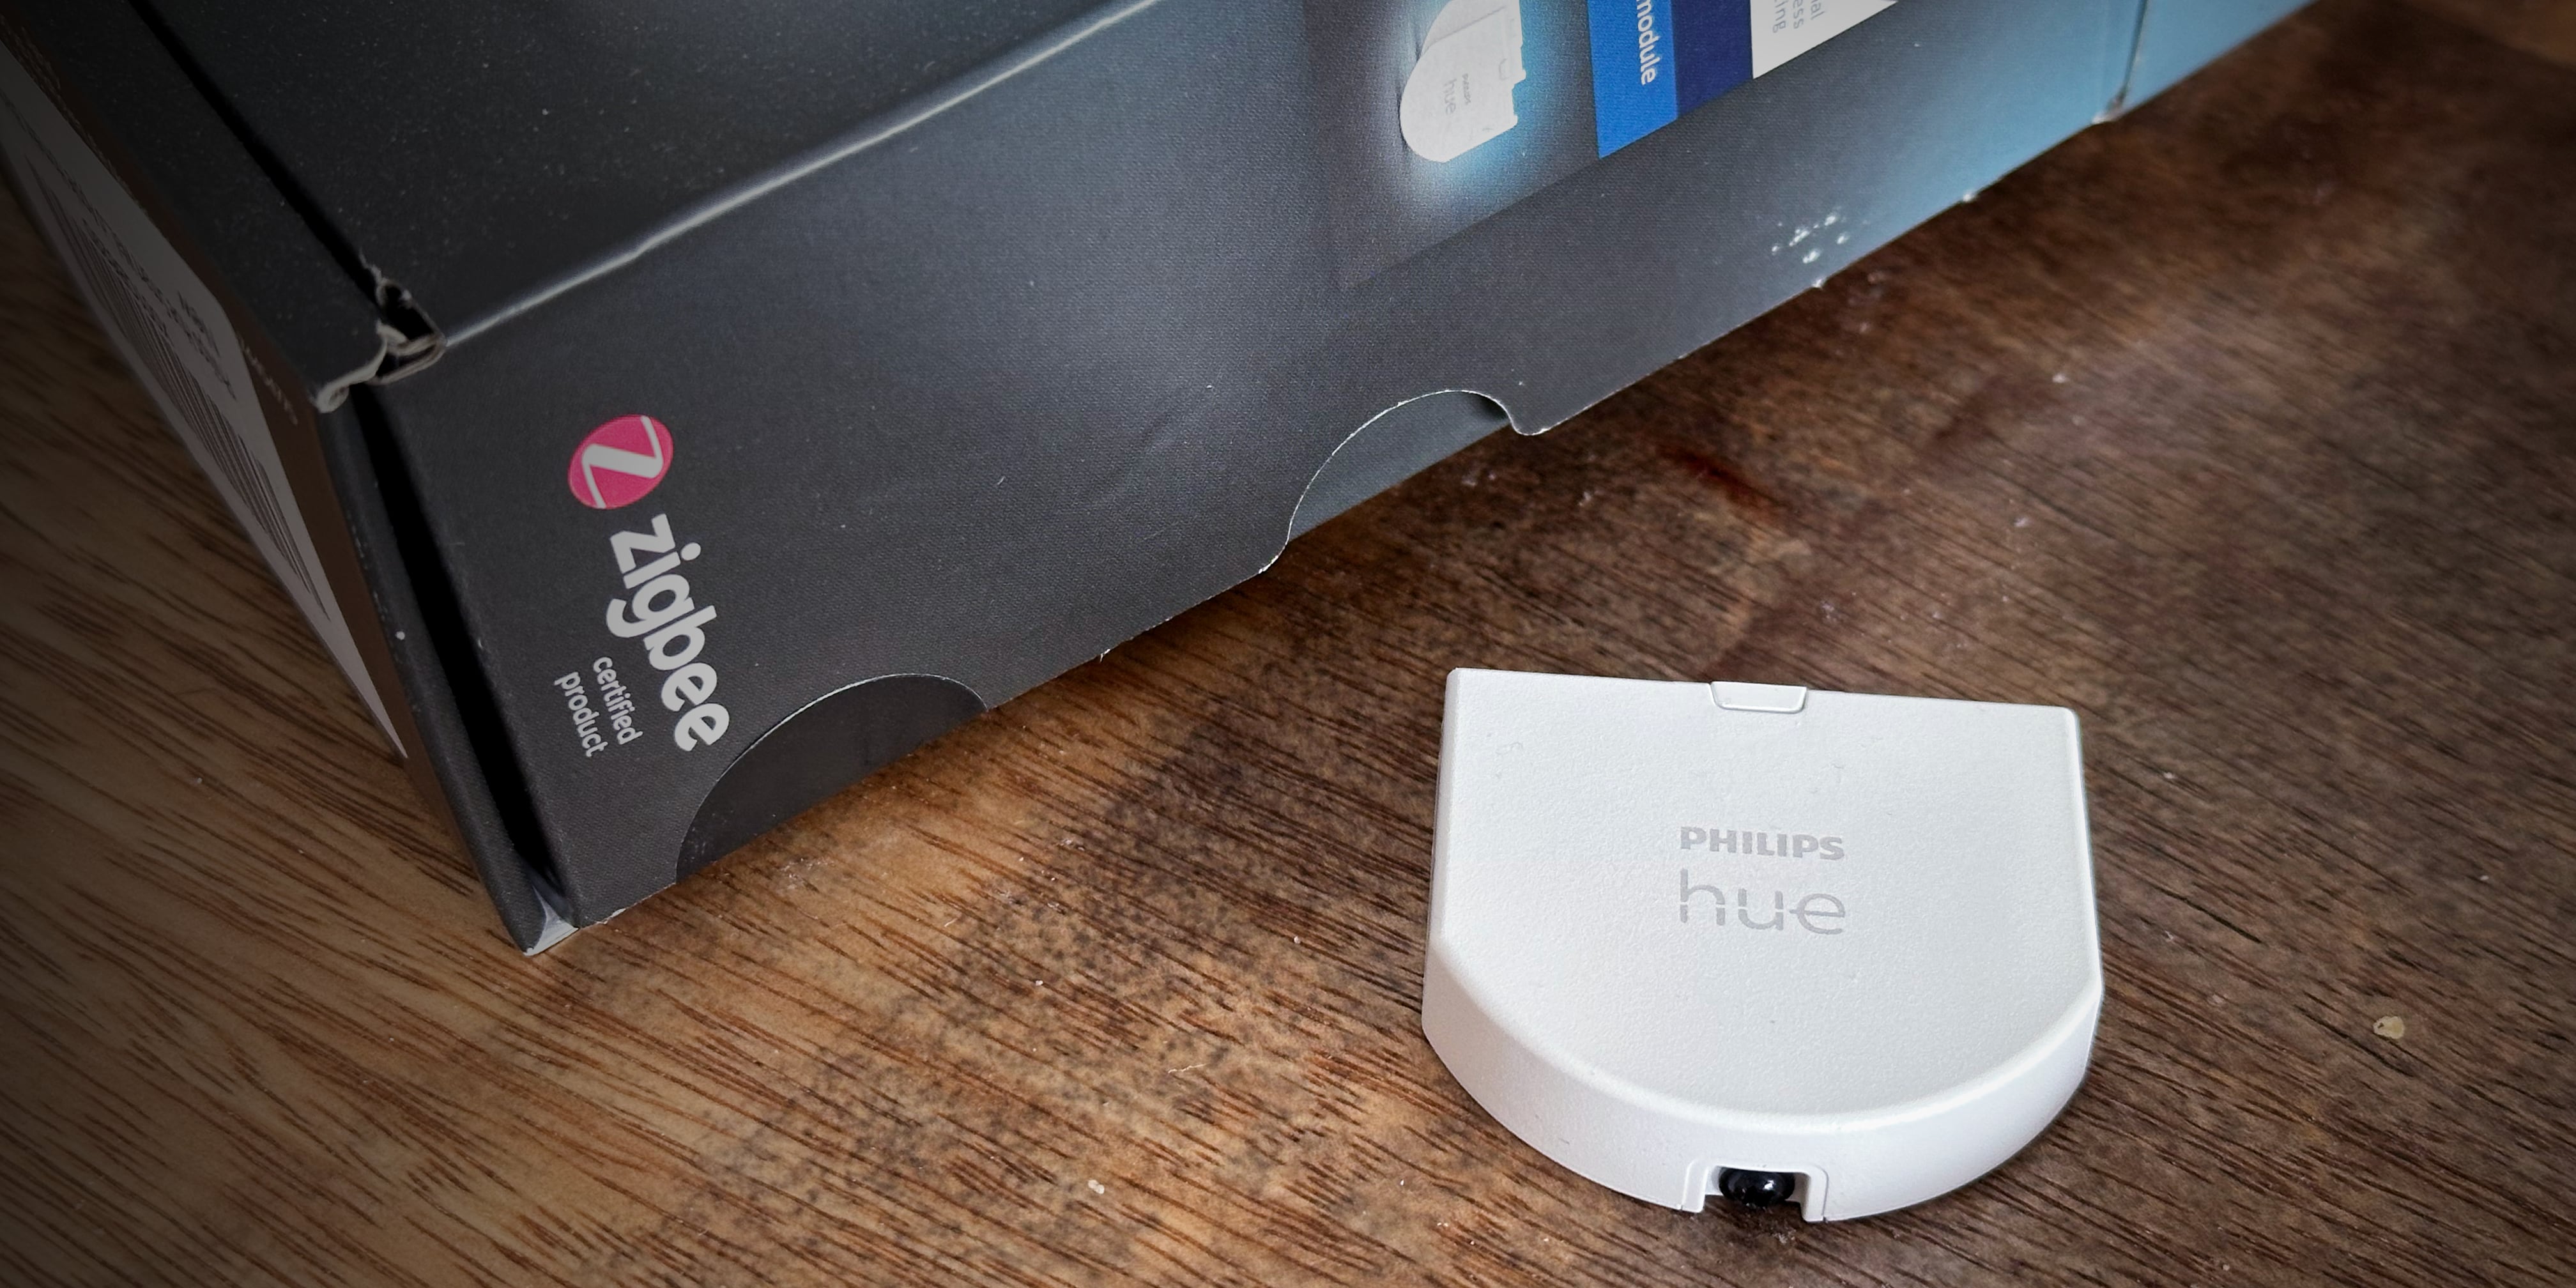 Philips Hue Review: Wall Switch module makes your existing light switches smart - 9to5Mac